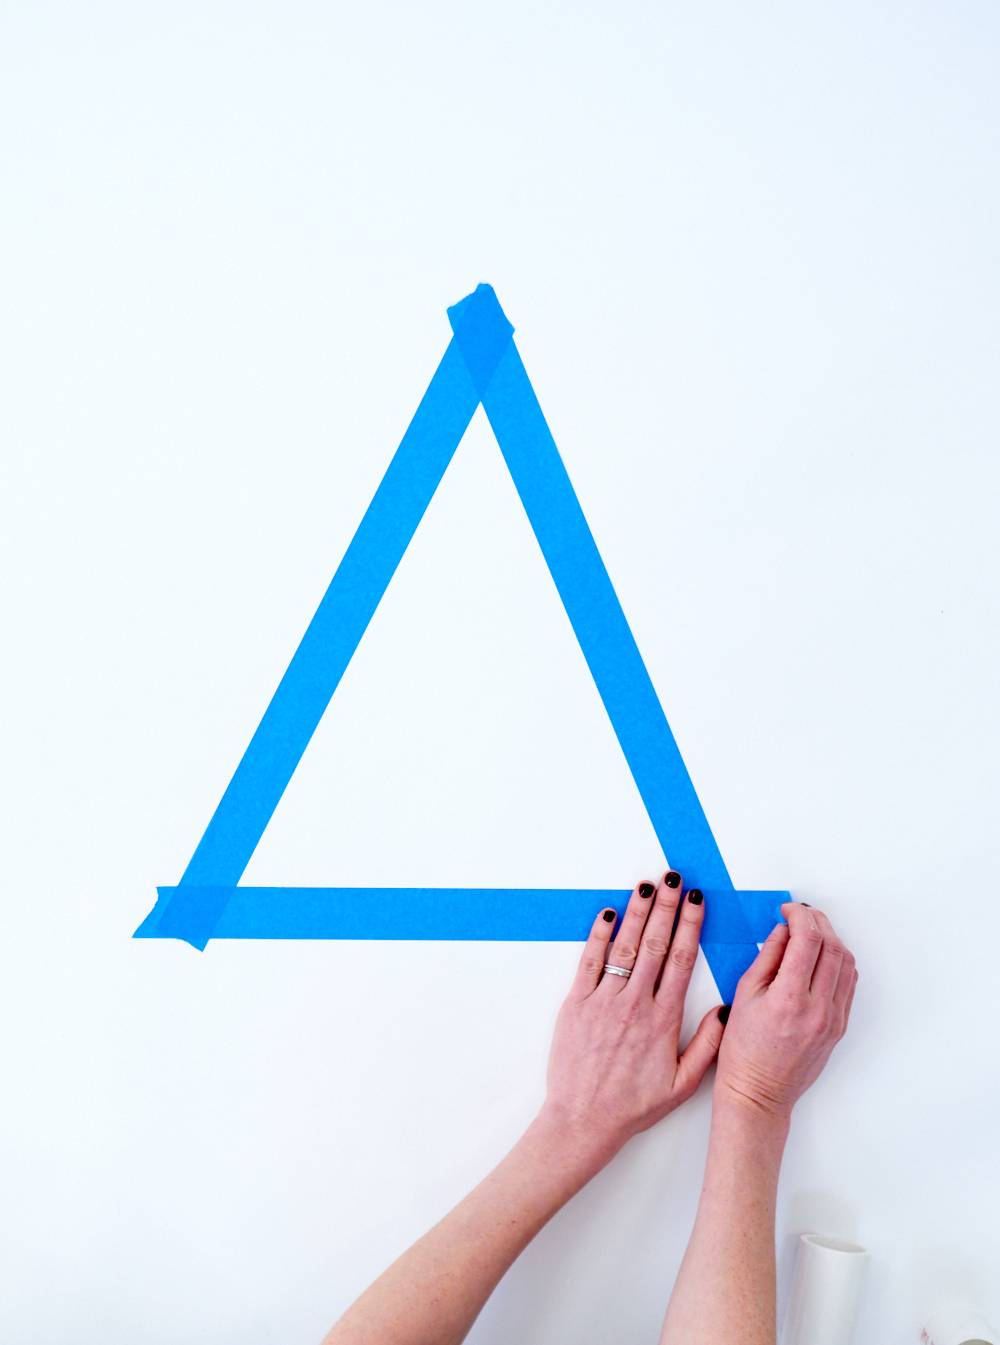 Hands placing blue tape to form a triangle on a white surface